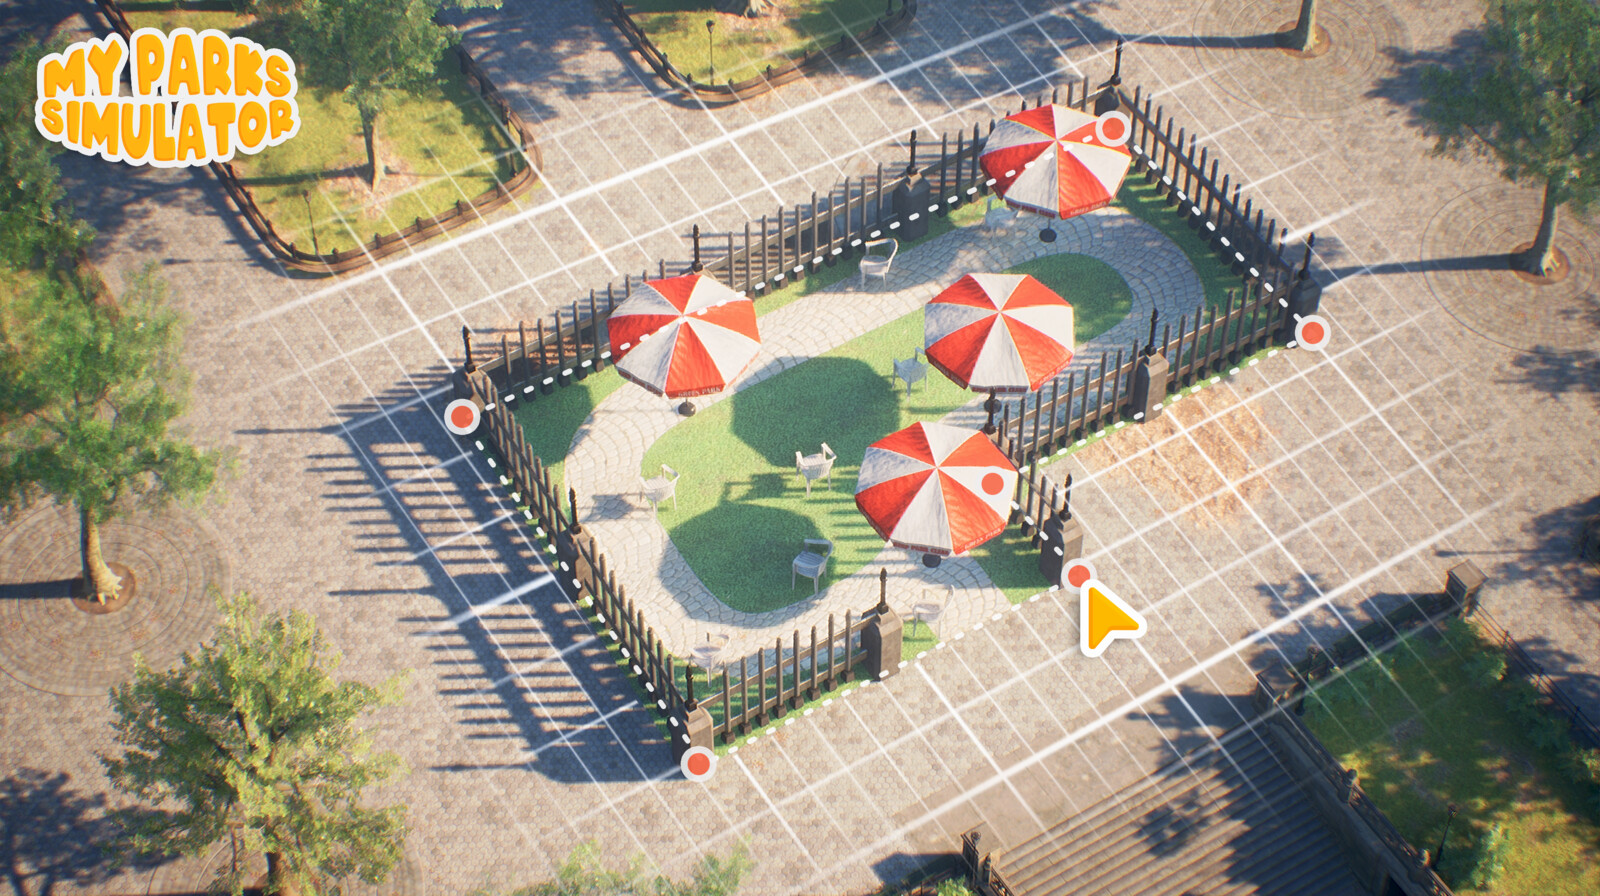 Mockup of the gameplay application of procedural parks tool